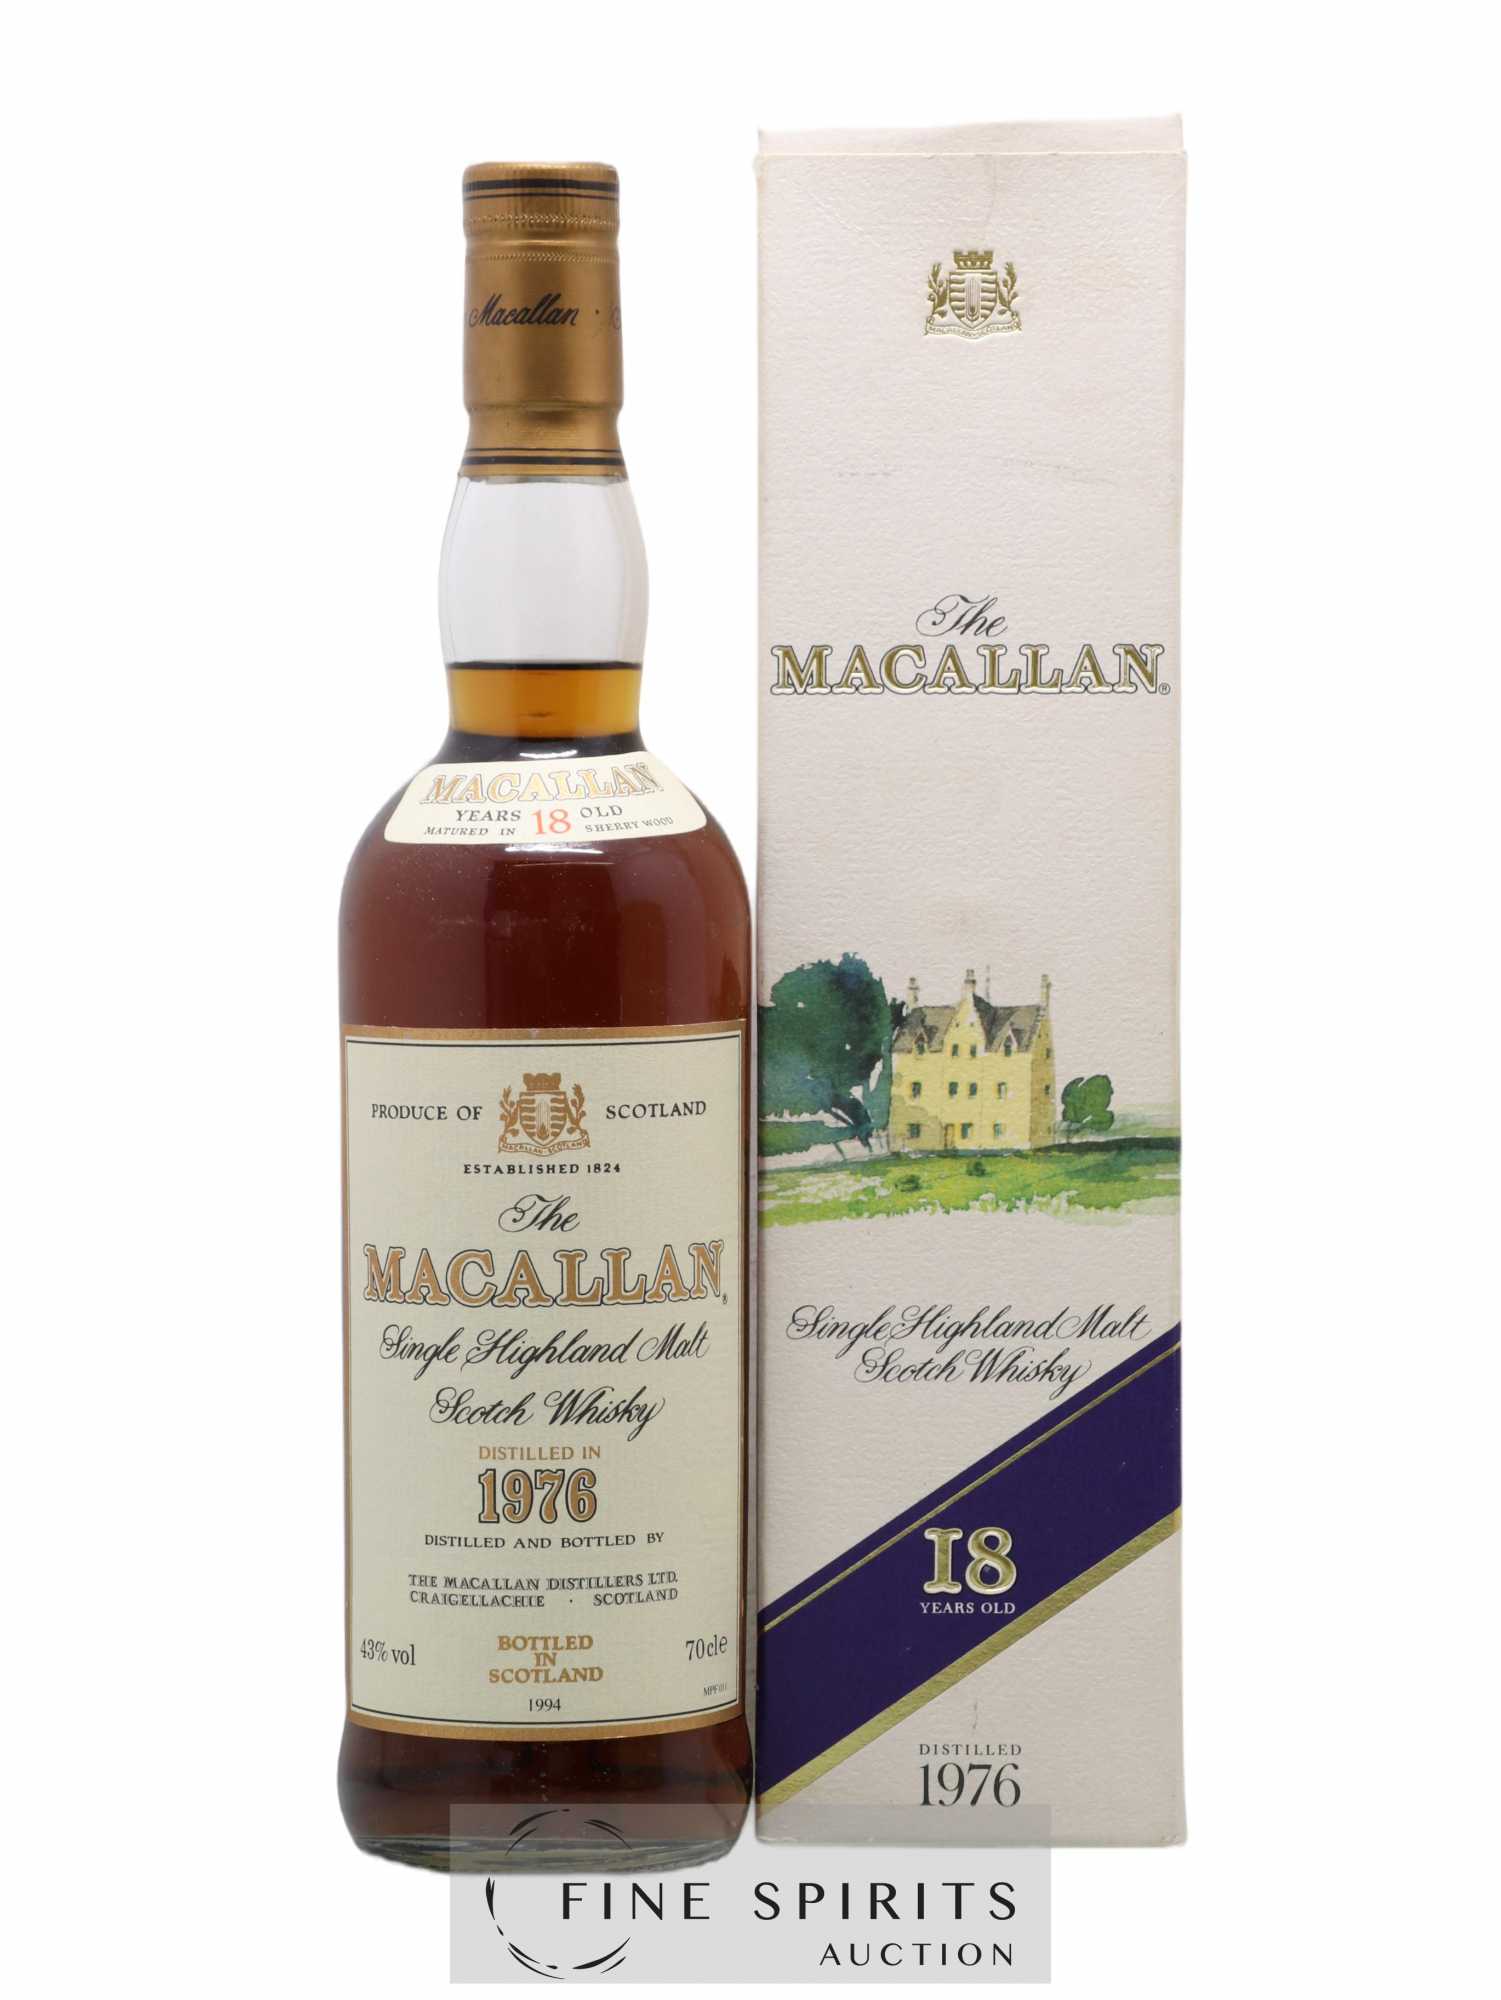 Macallan (The) 18 years 1976 Of. Sherry Wood Matured - bottled 1994 